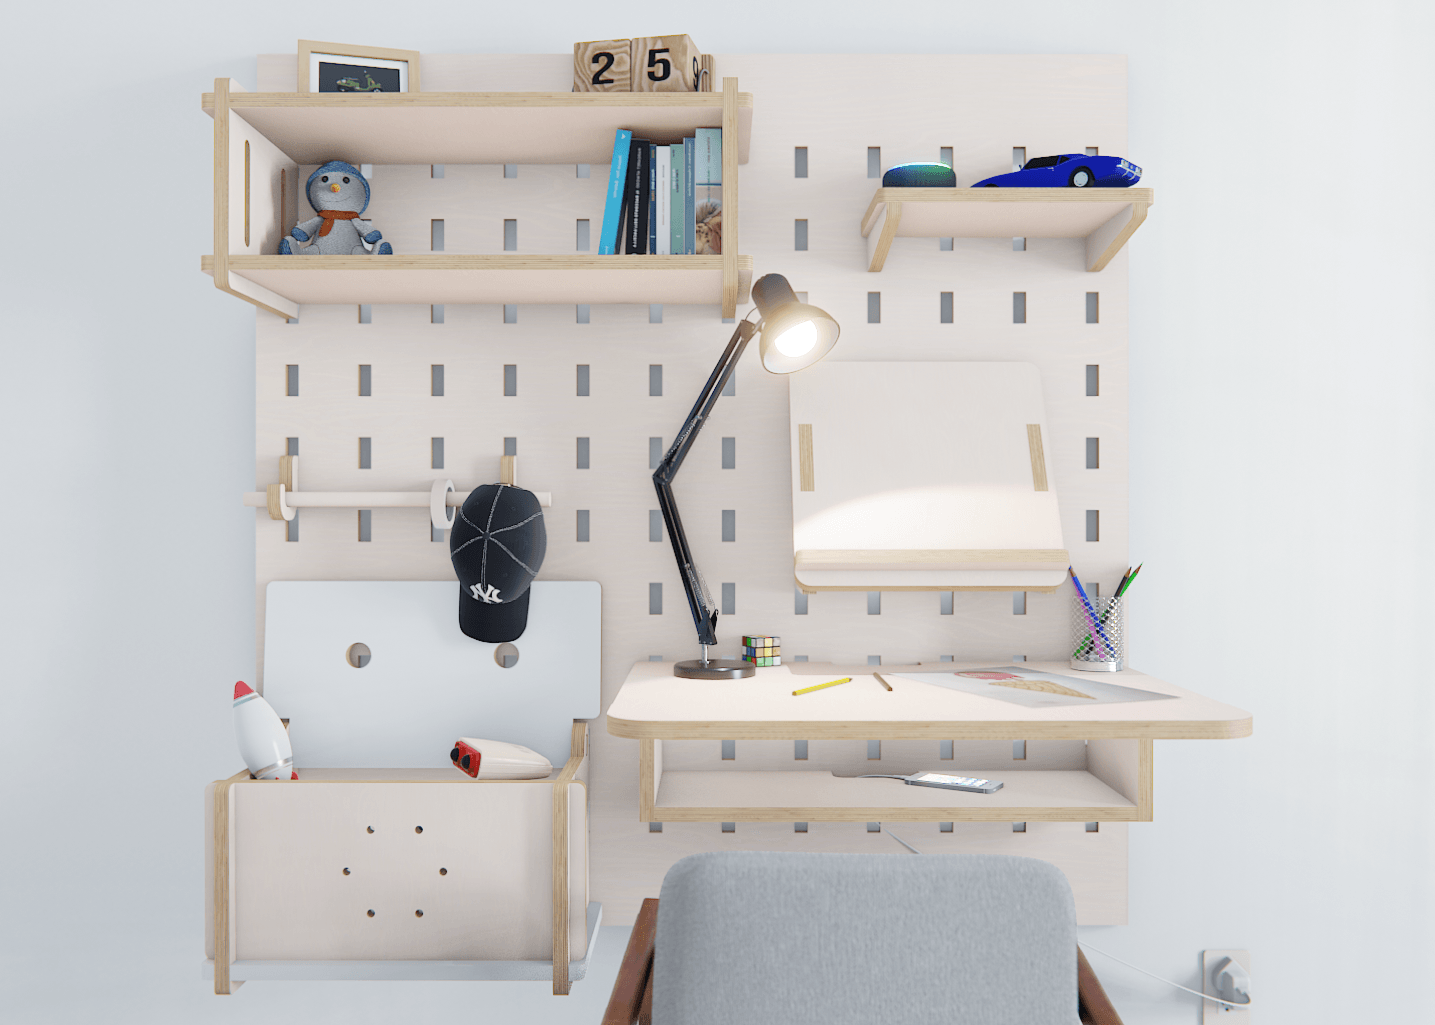 Our pegboard shelf - a universal solution for streamlined storage. Sizes for every need.